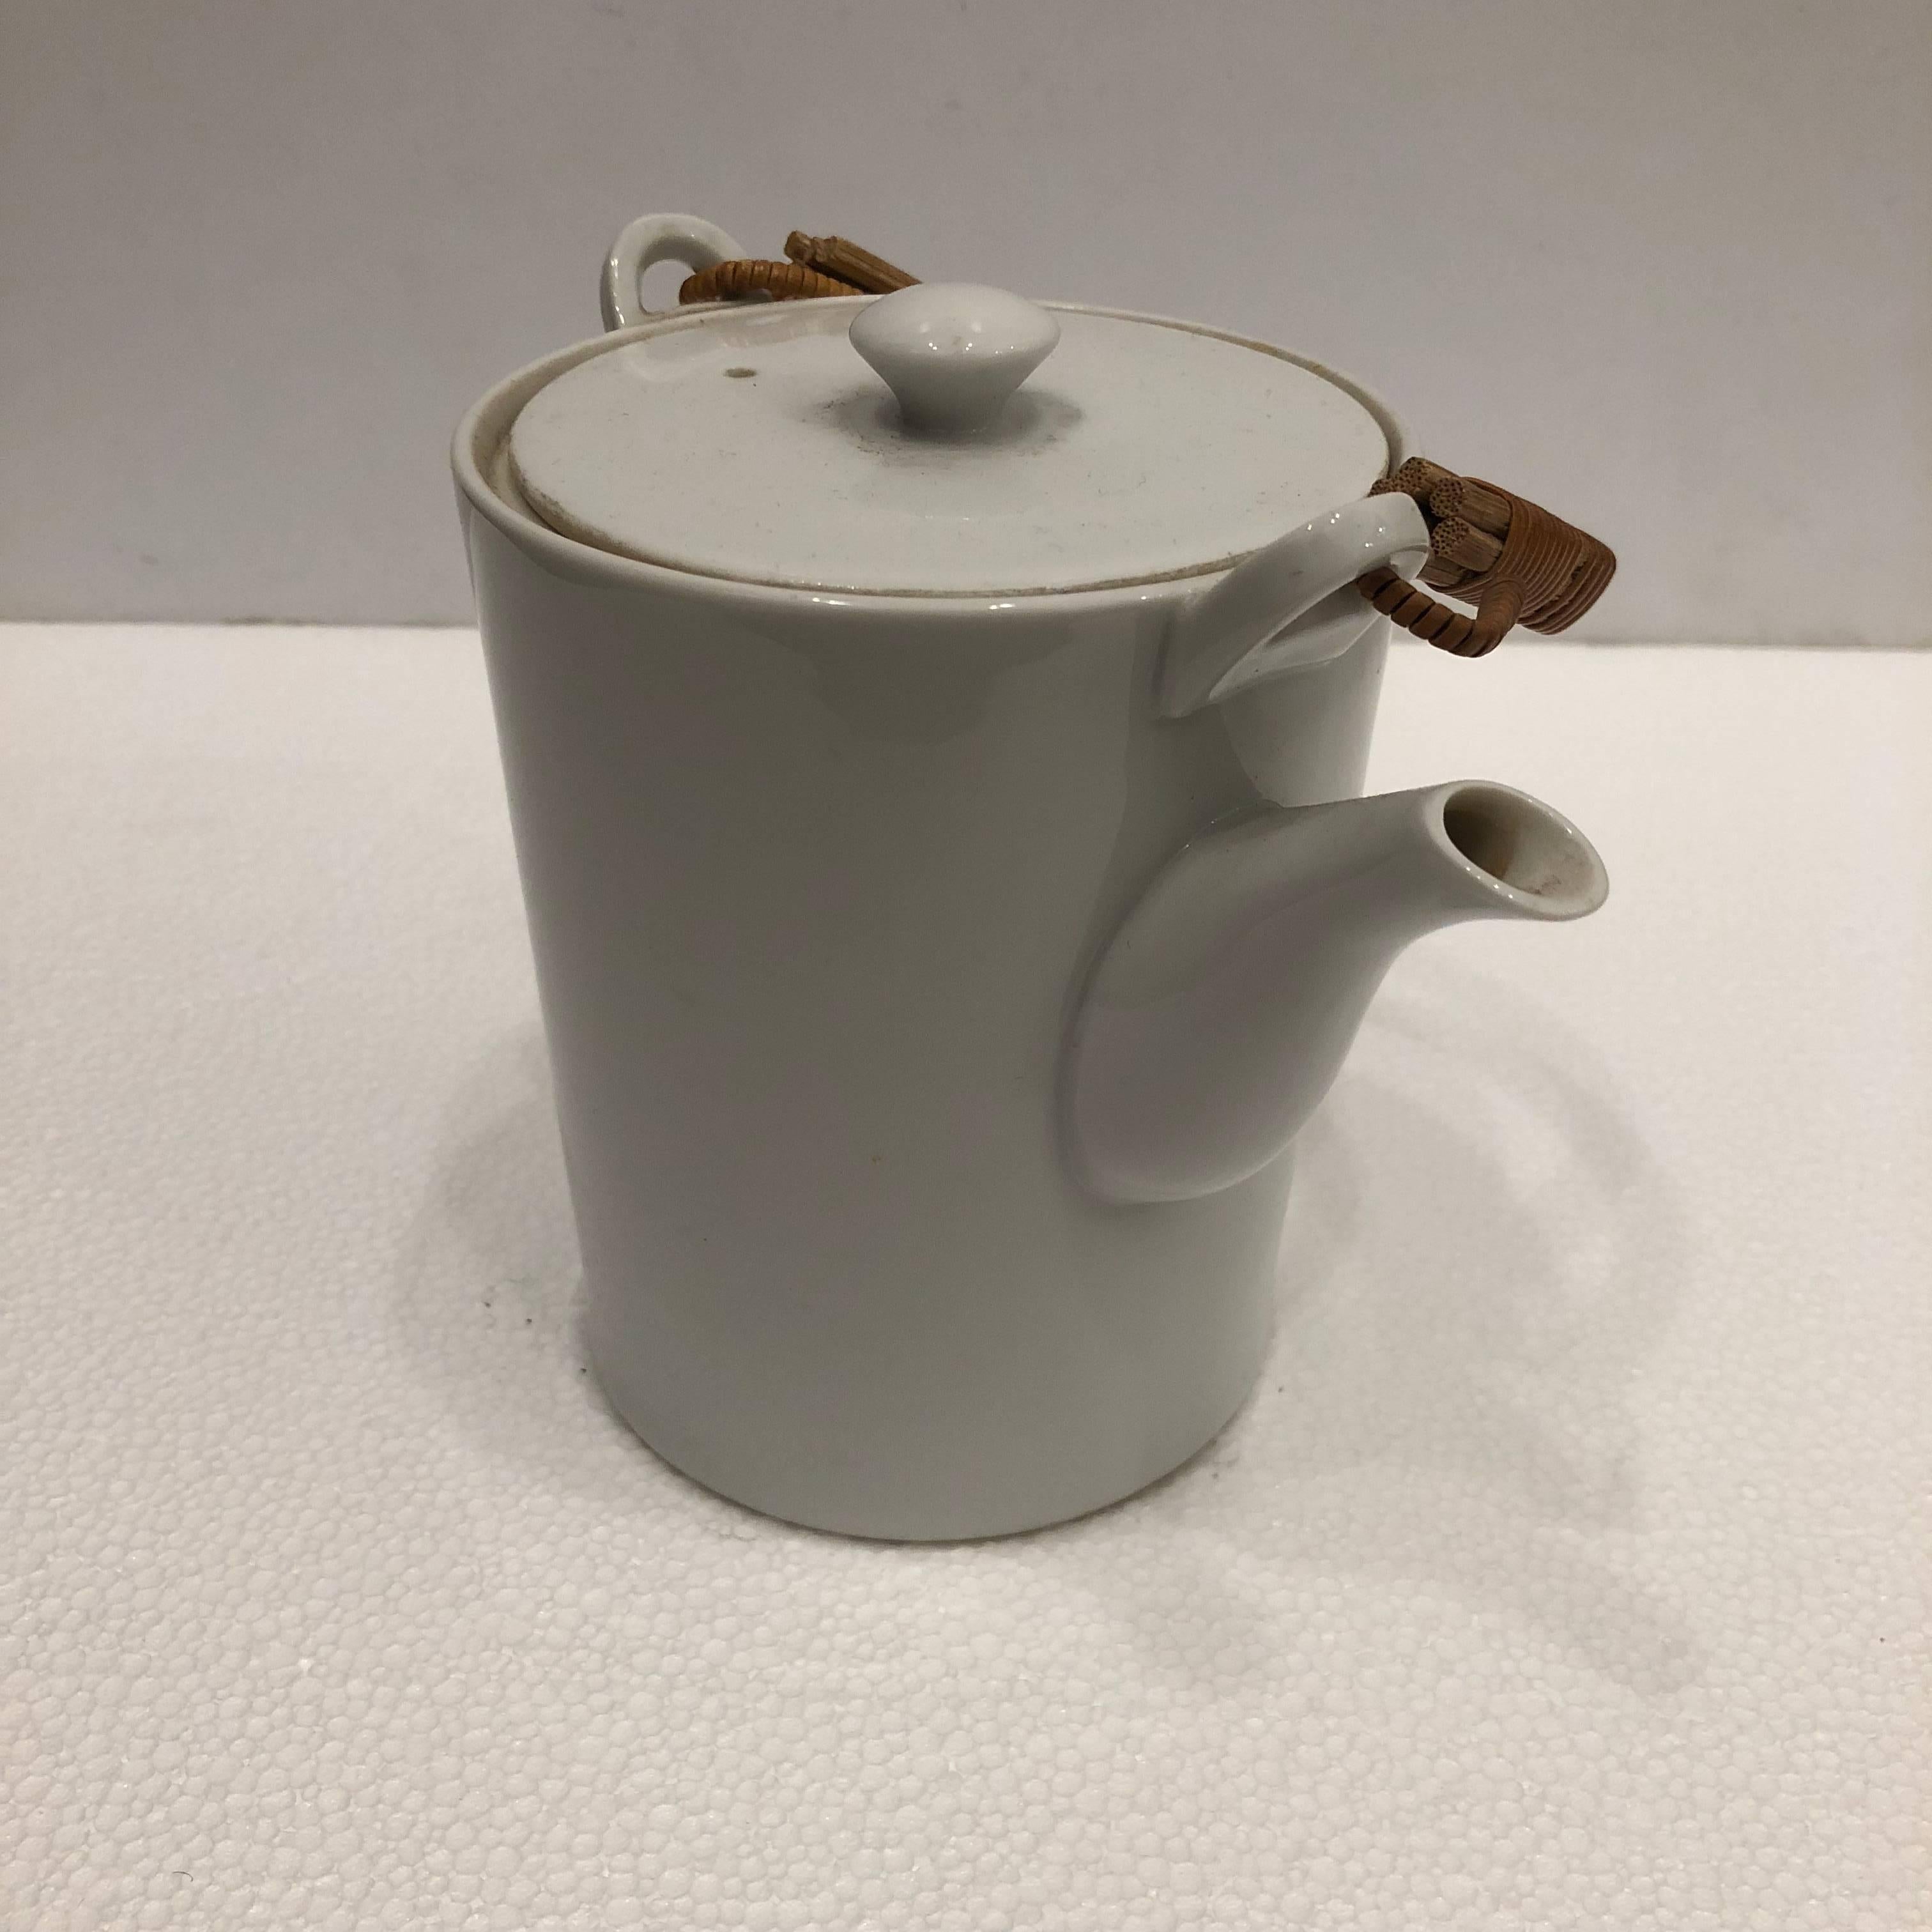 Very rare white porcelain teapot by Freeman Lederman for Kenji Fujita. With a cane handle, in an excellent condition.